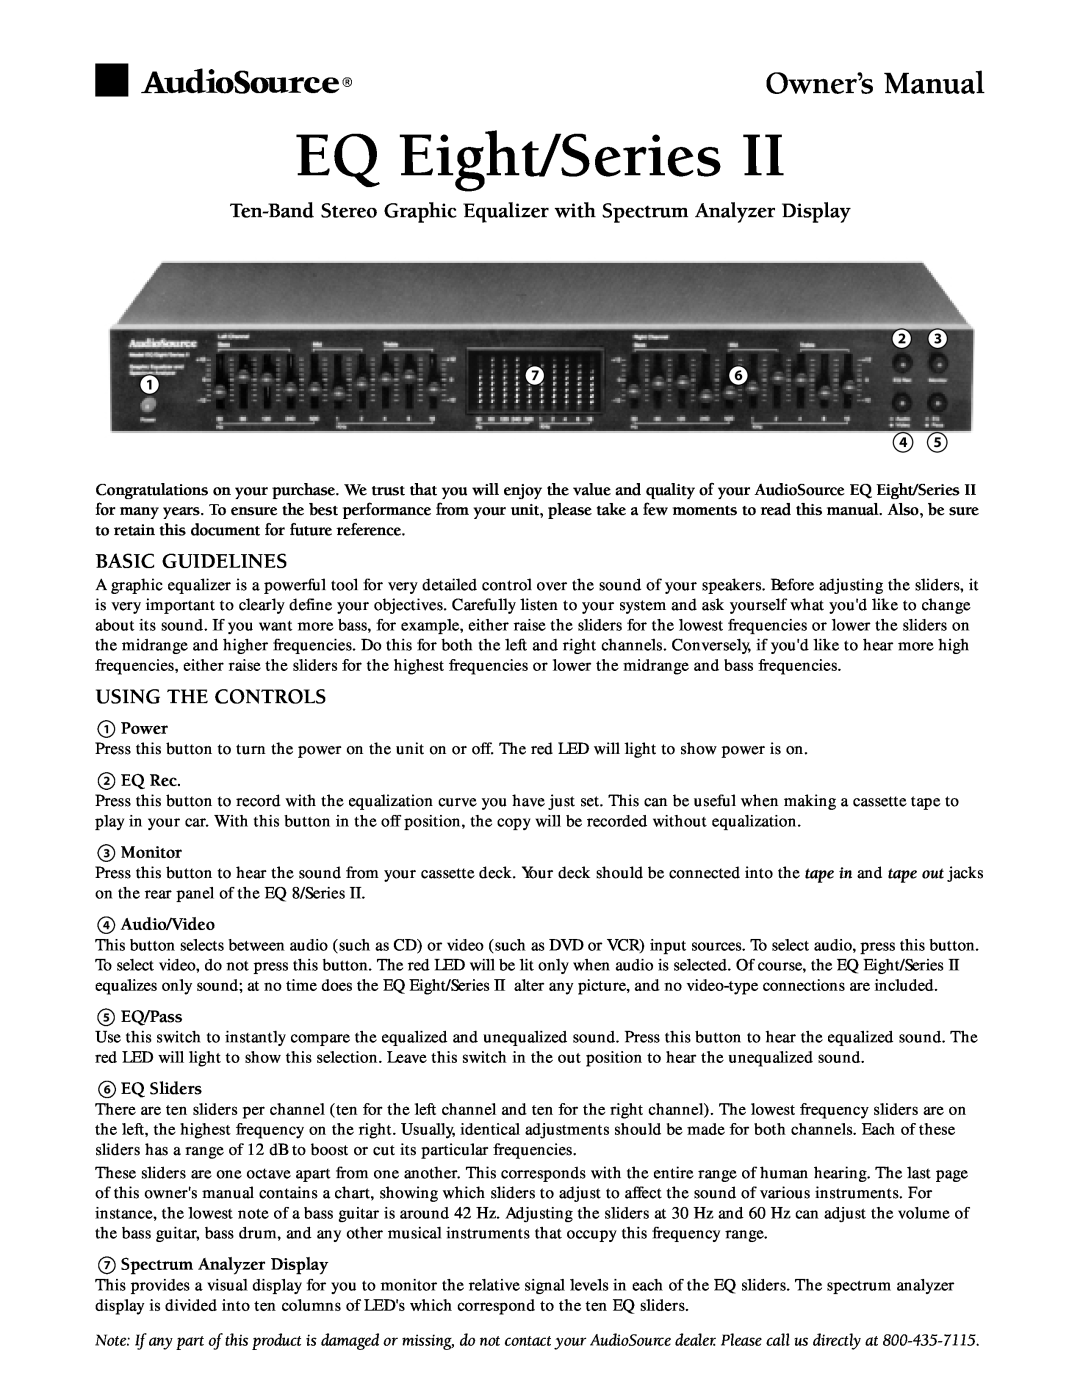 AudioSource EQ Eight/Series II owner manual Basic Guidelines, Using The Controls, 1Power, 2EQ Rec, 3Monitor, 4Audio/Video 